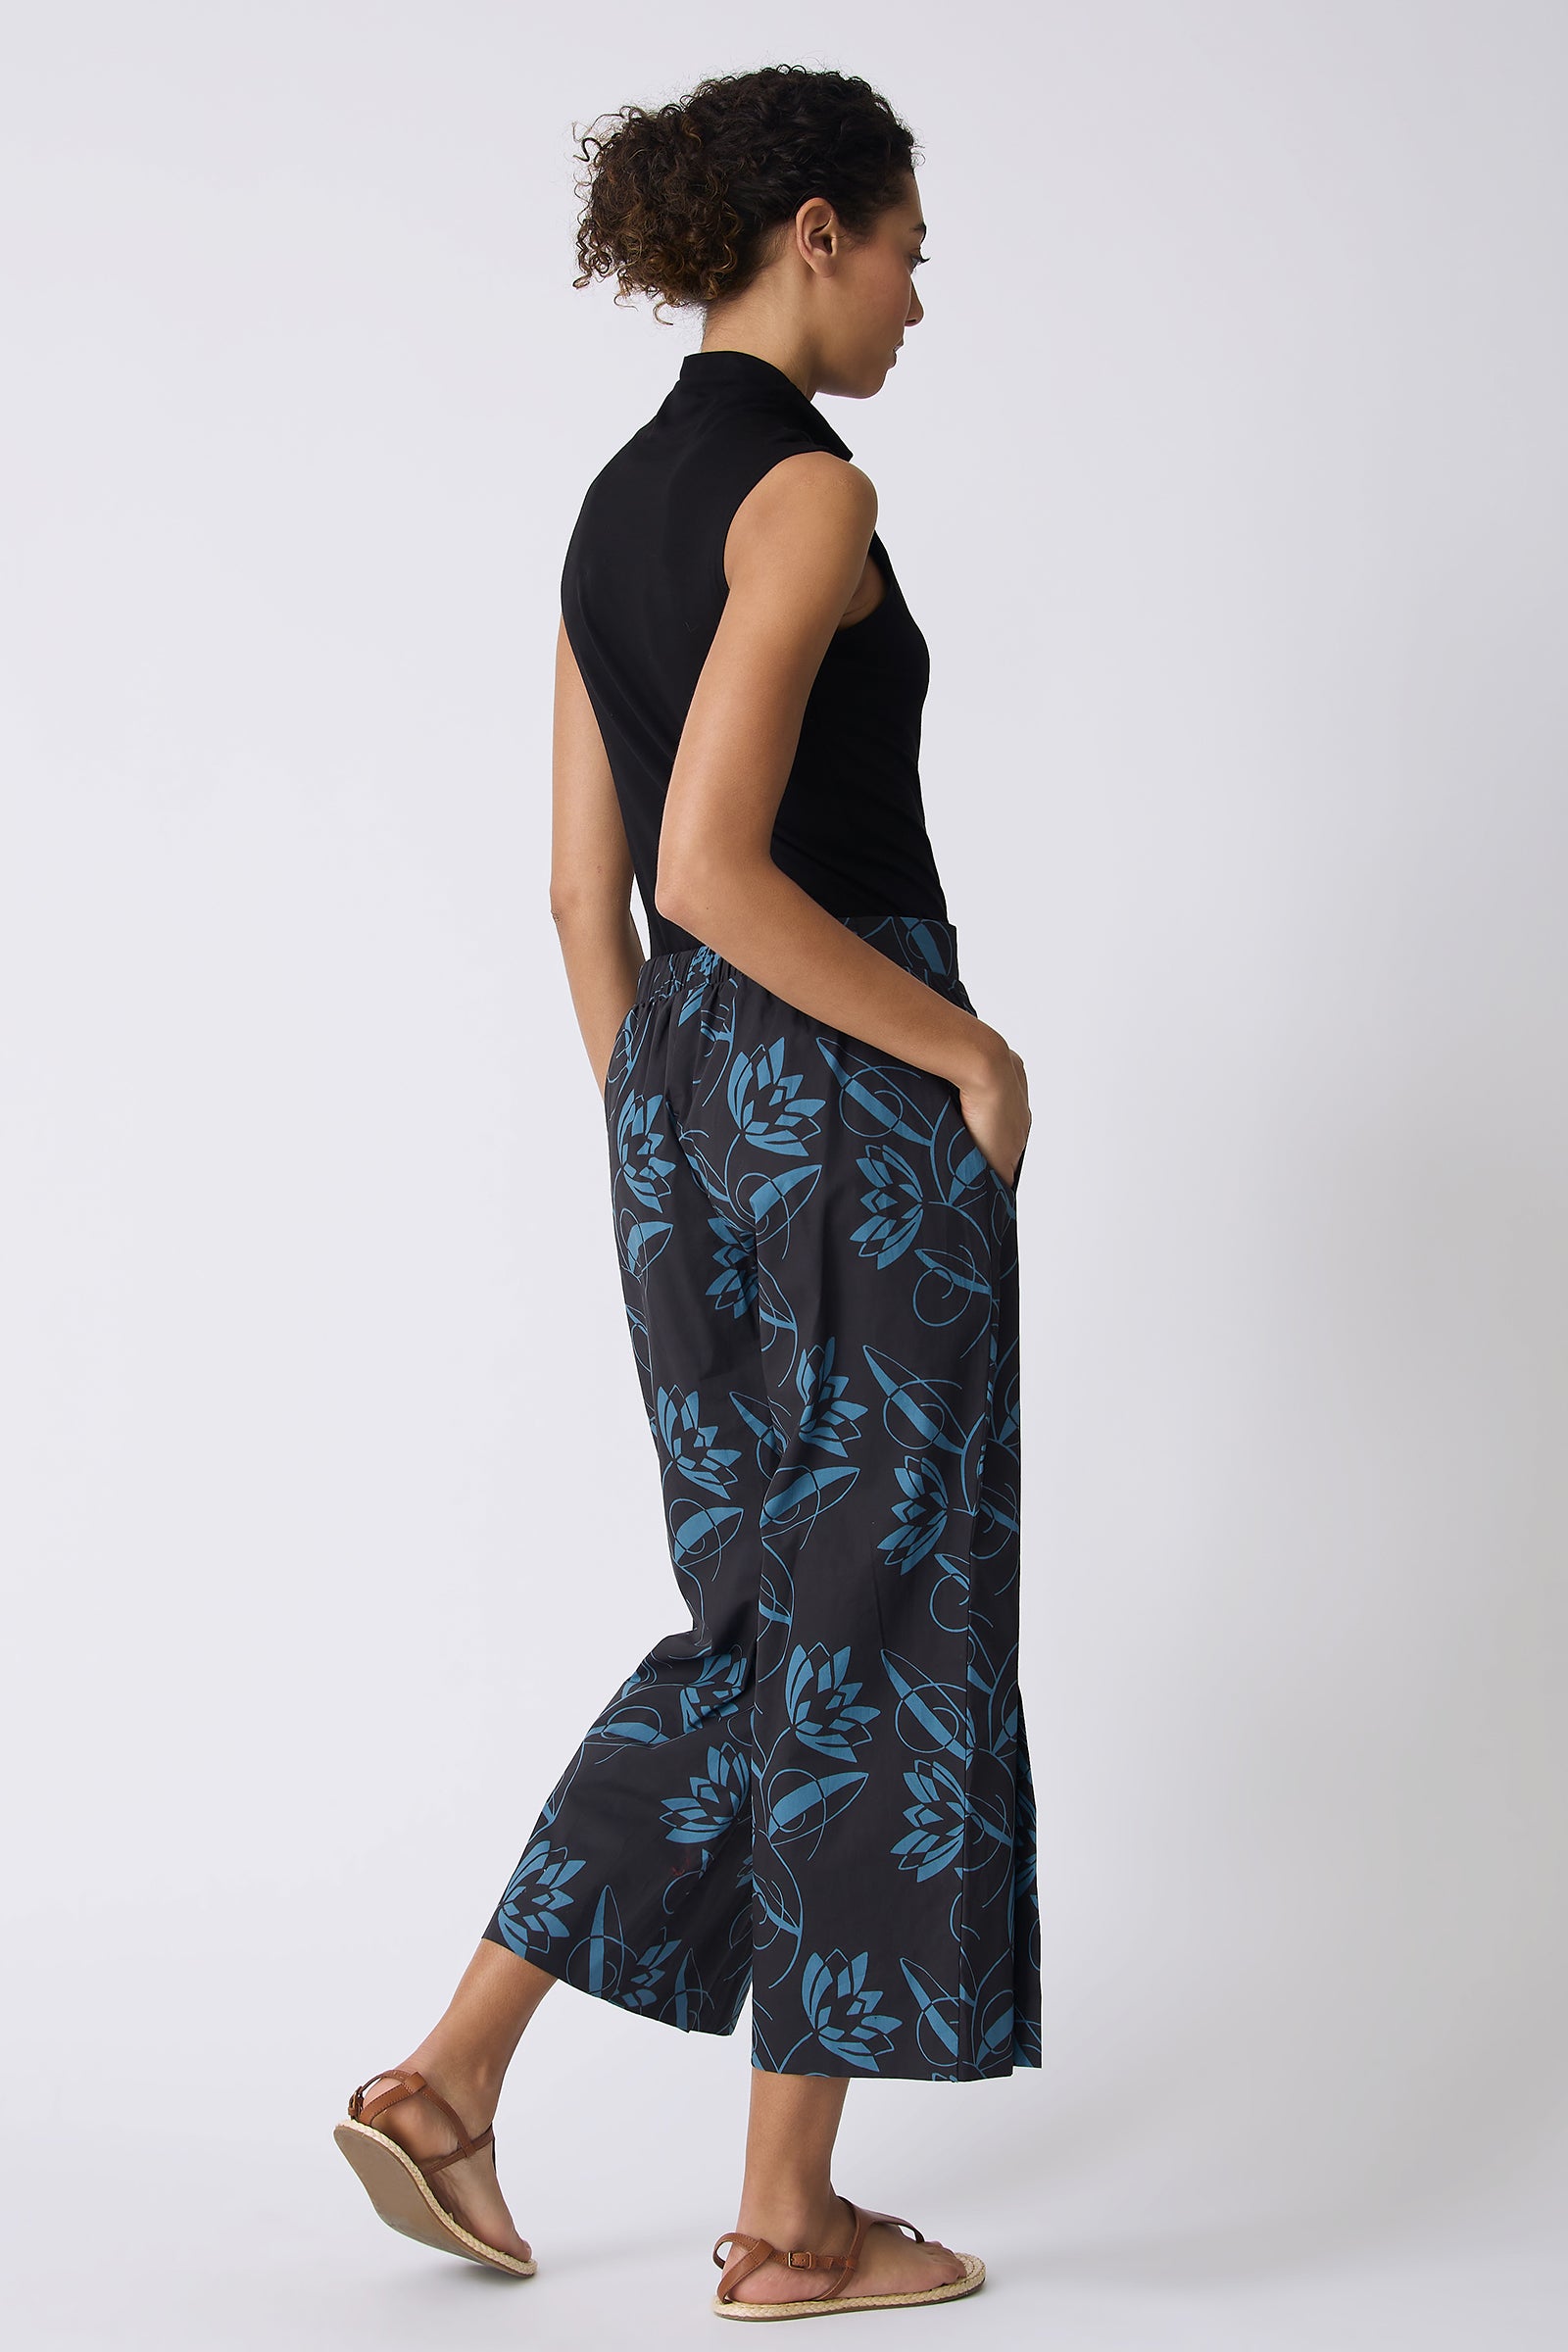 Kal Rieman Tami Side Kick Pant in Lotus Print Blue on model with hand in pocket full front view